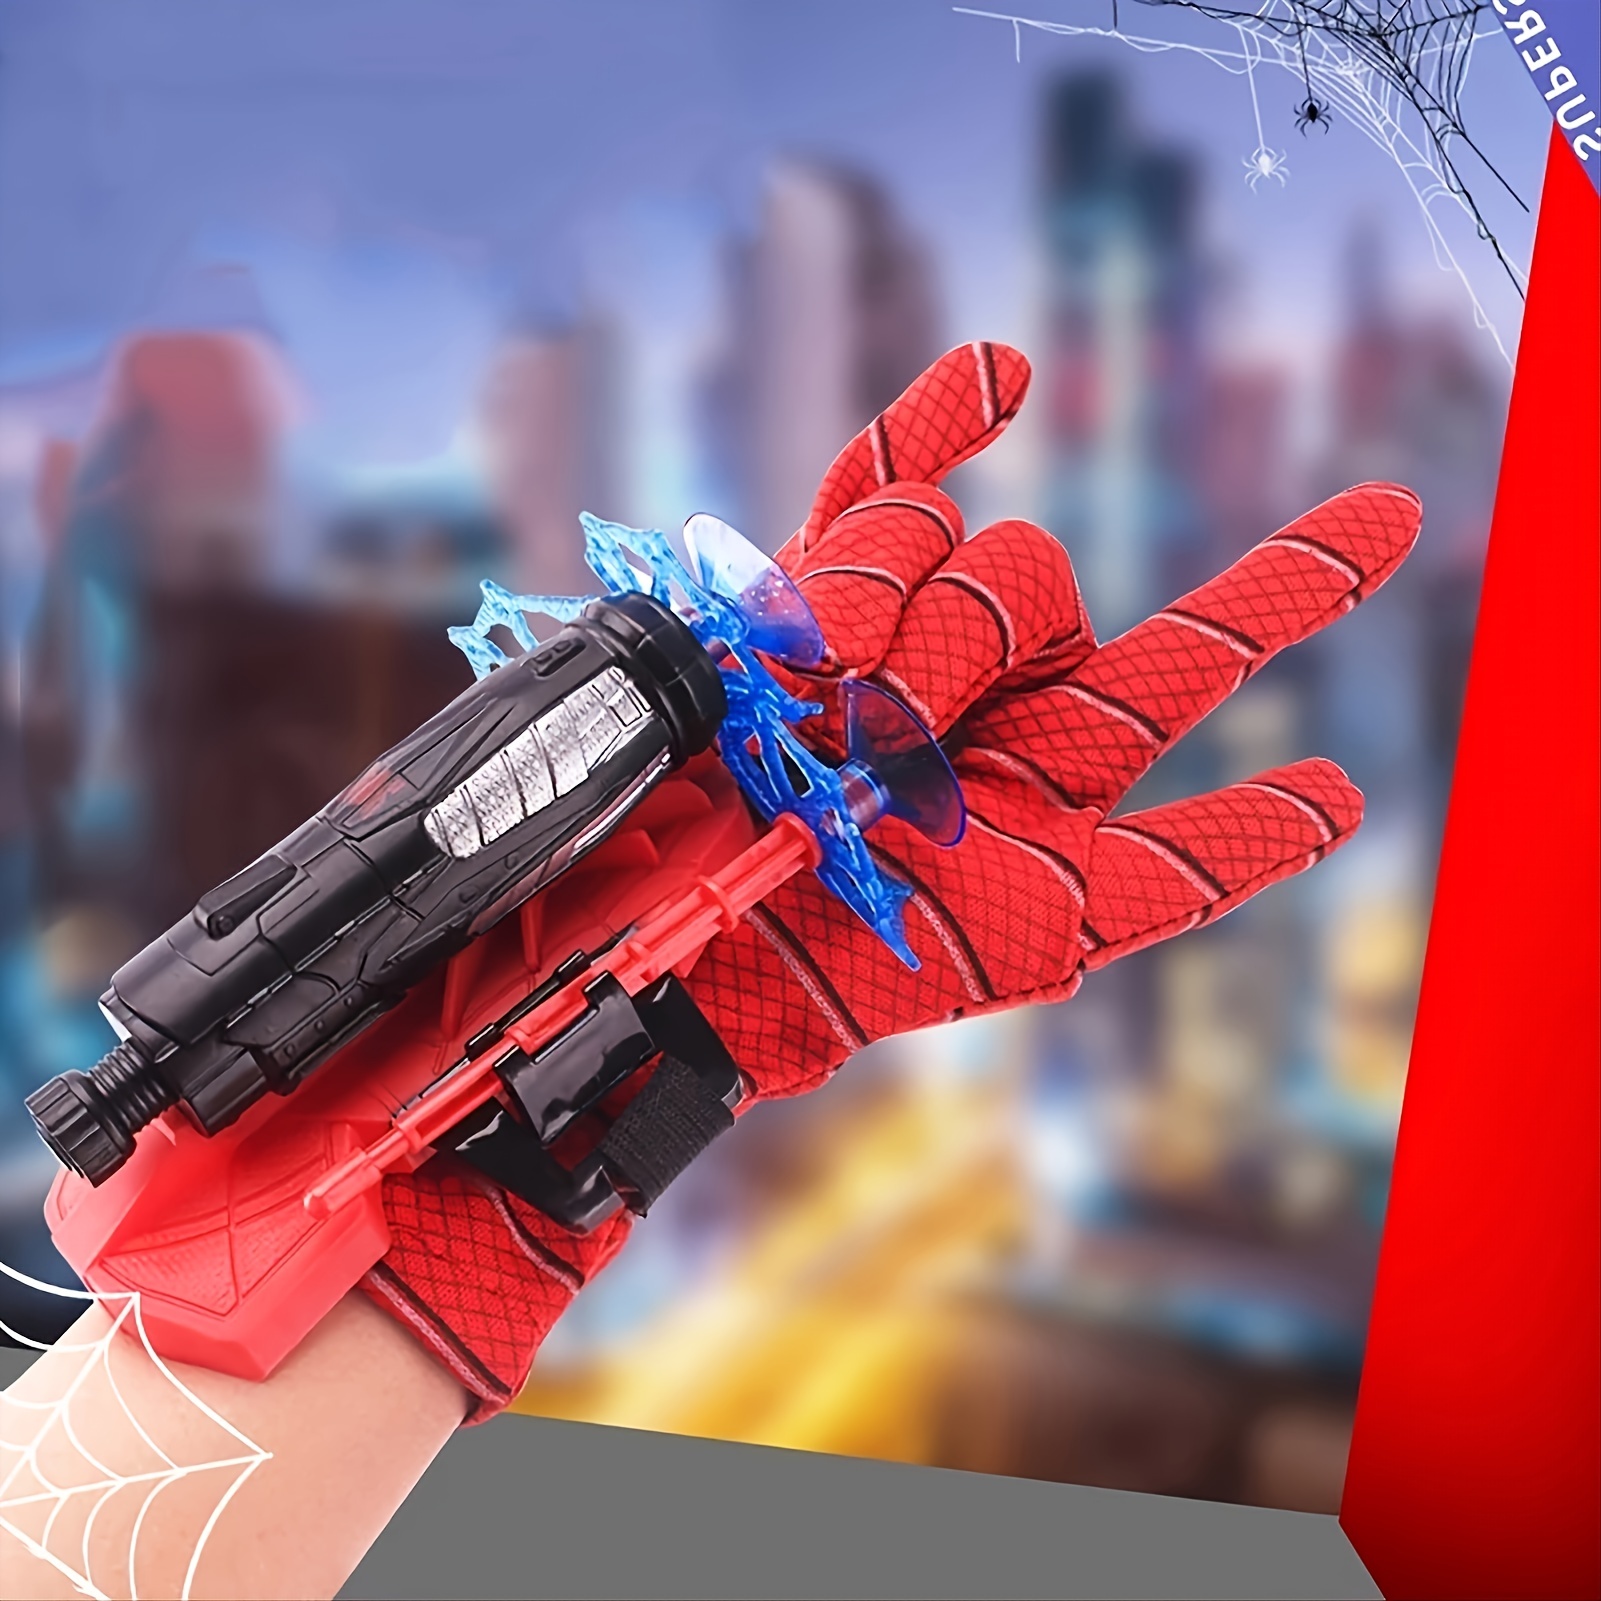 Spider Web Shooters Toy For Kids Fans Hero Launcher Wrist Toy Set Cosplay Launcher Bracers Accessories Sticky Wall Soft Bombfunny Childrens Educational Toys - Toys and Games